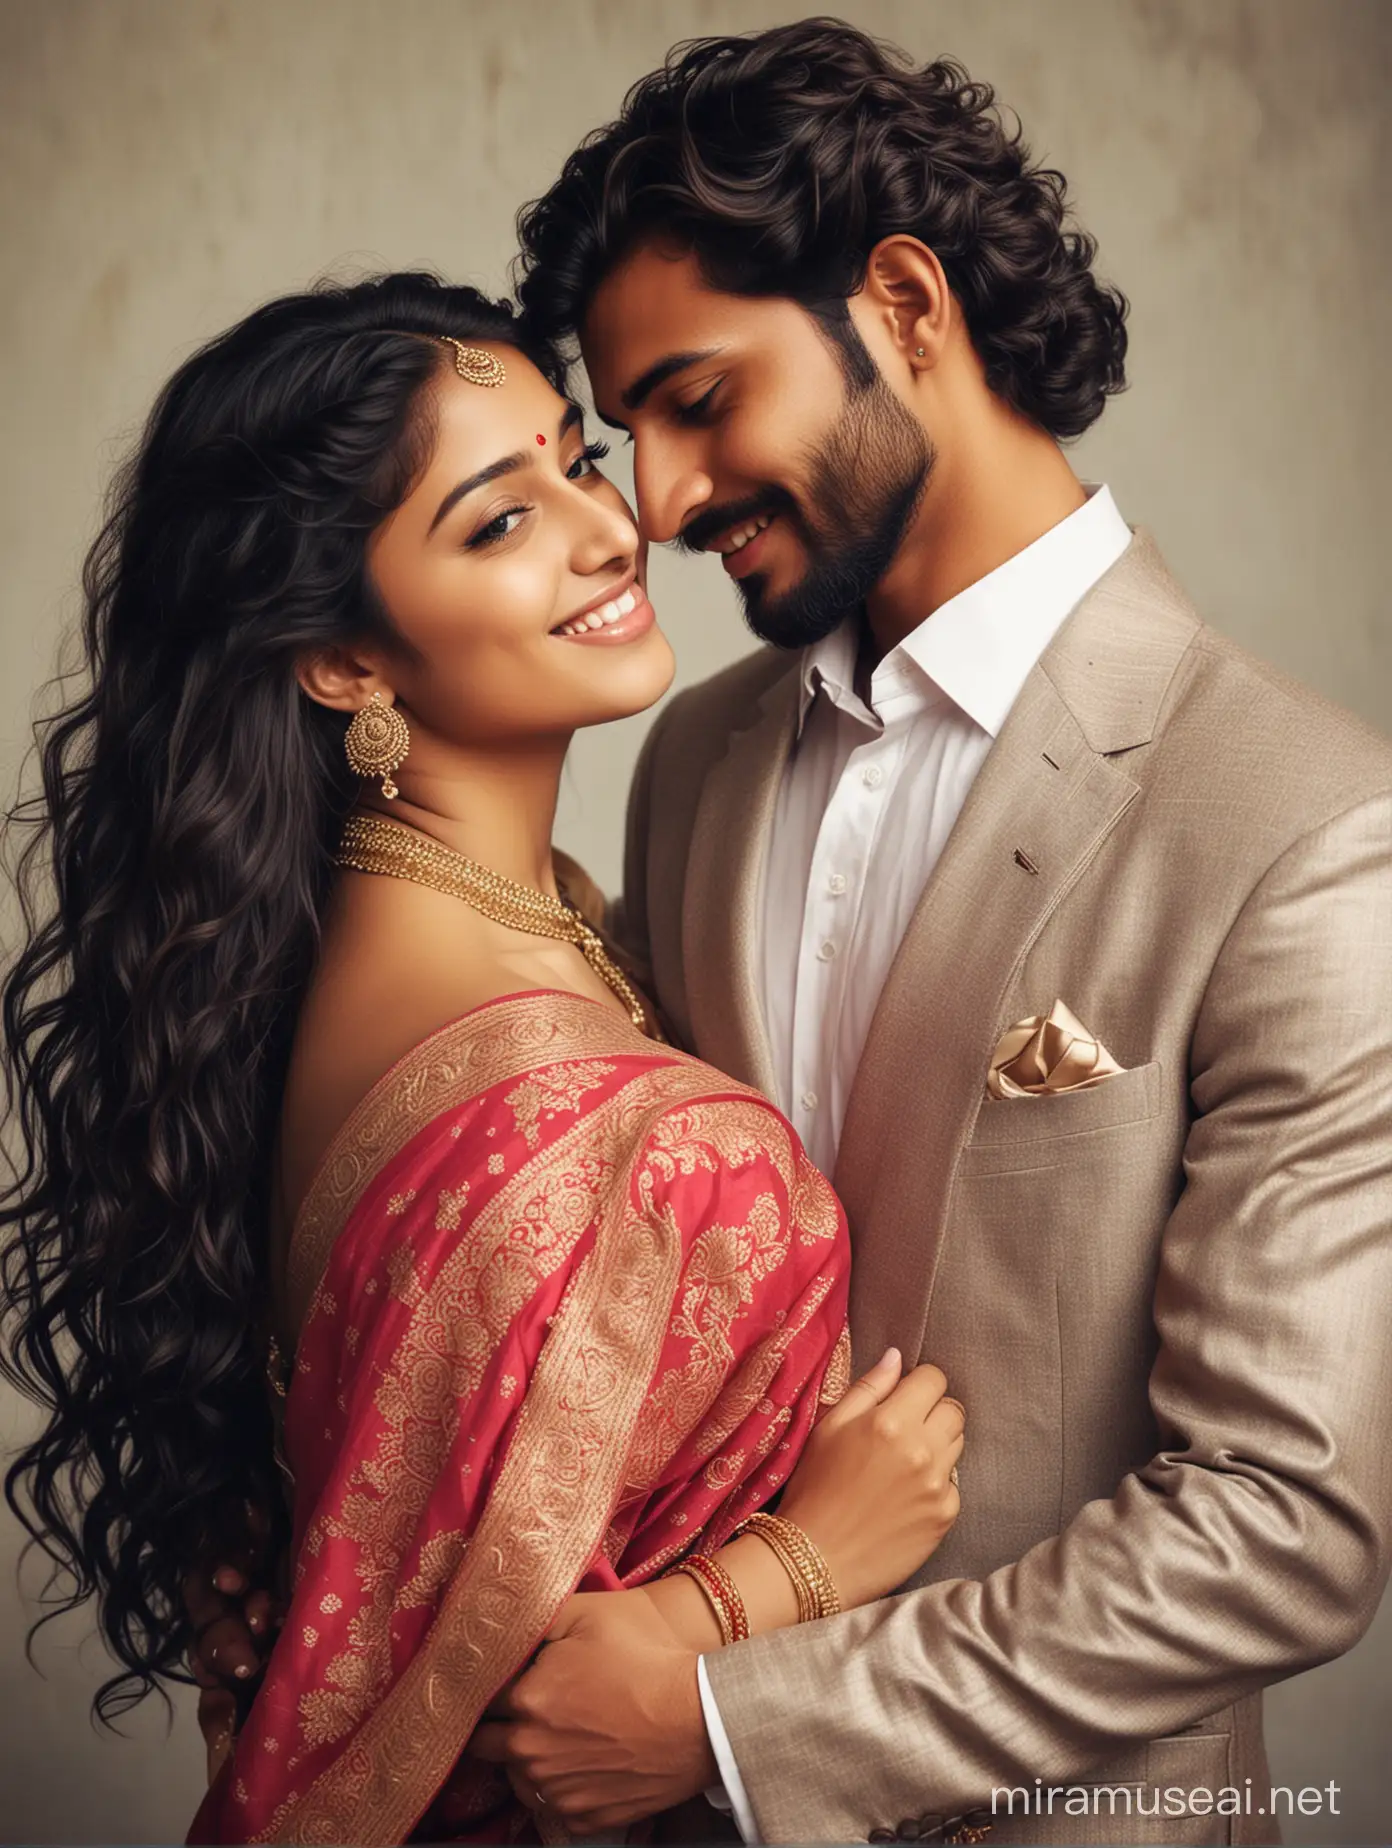 two intimate lovers, indian tall handsome boy, 22 years old, european features, formal suit, light trim beard, alfa male, girl, 18 years old, most beautiful indian girl, full body jewelry, elegant saree look, low cut back, long curly hair, touching head to boy shoulder, shy and modest addictive smile, boy comforting girl with one hand on back of girl, photo realistic, 4k.